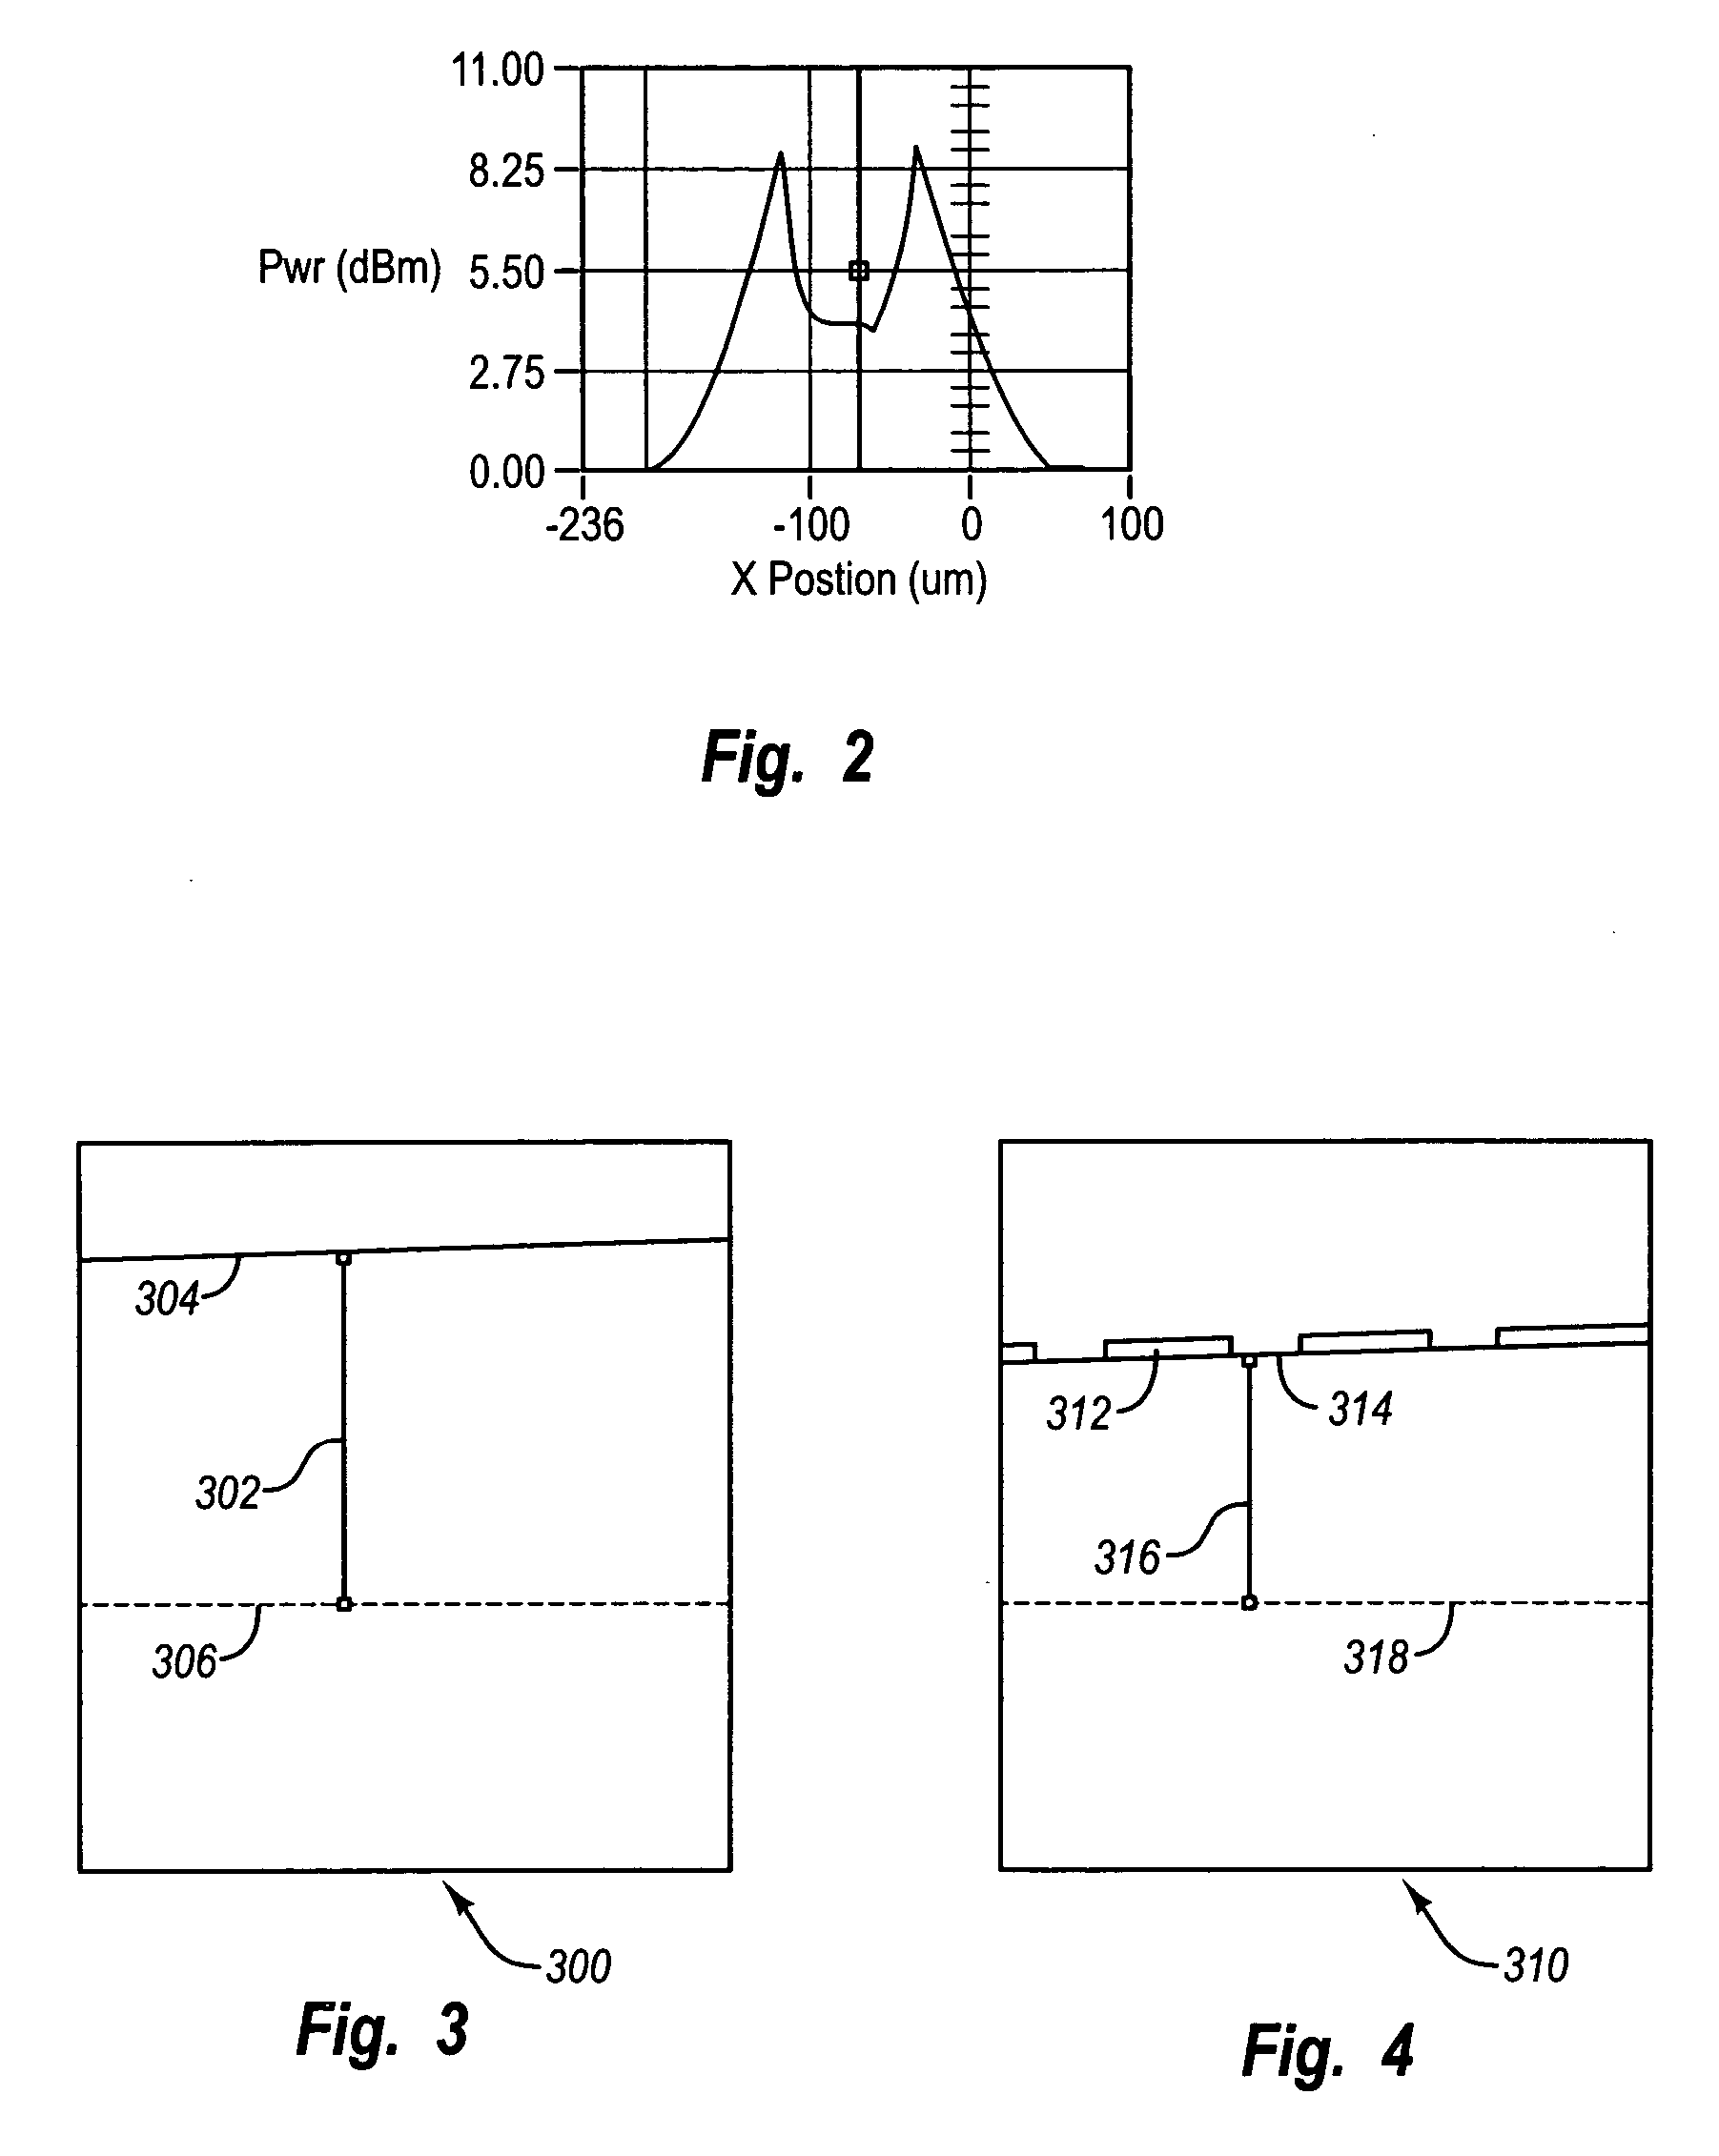 Starved source diffusion for avalanche photodiode